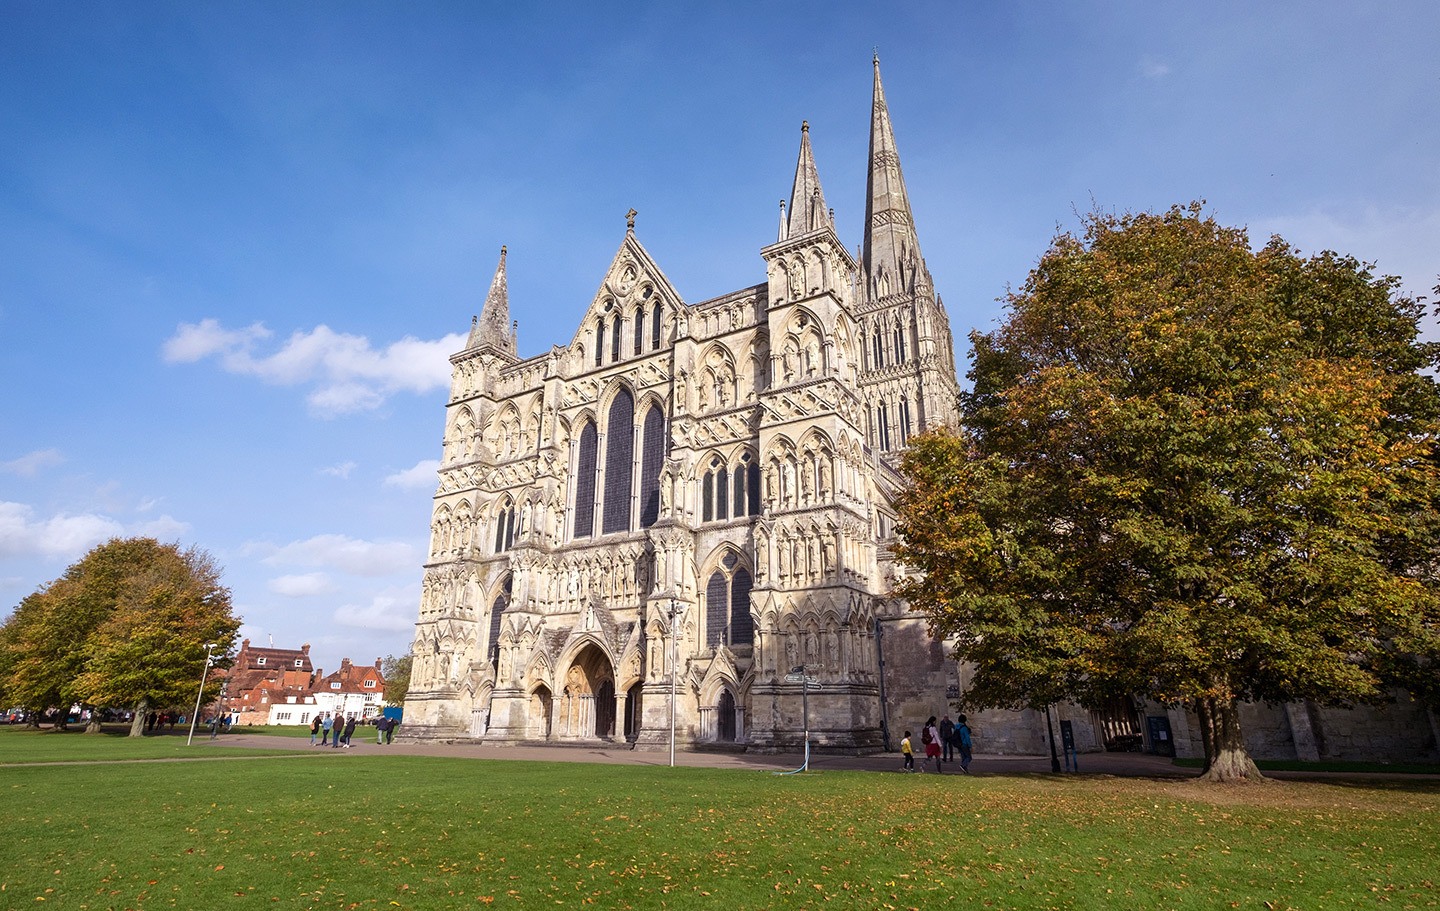 Salisbury cathedral on a trip to the historic sites of England by train